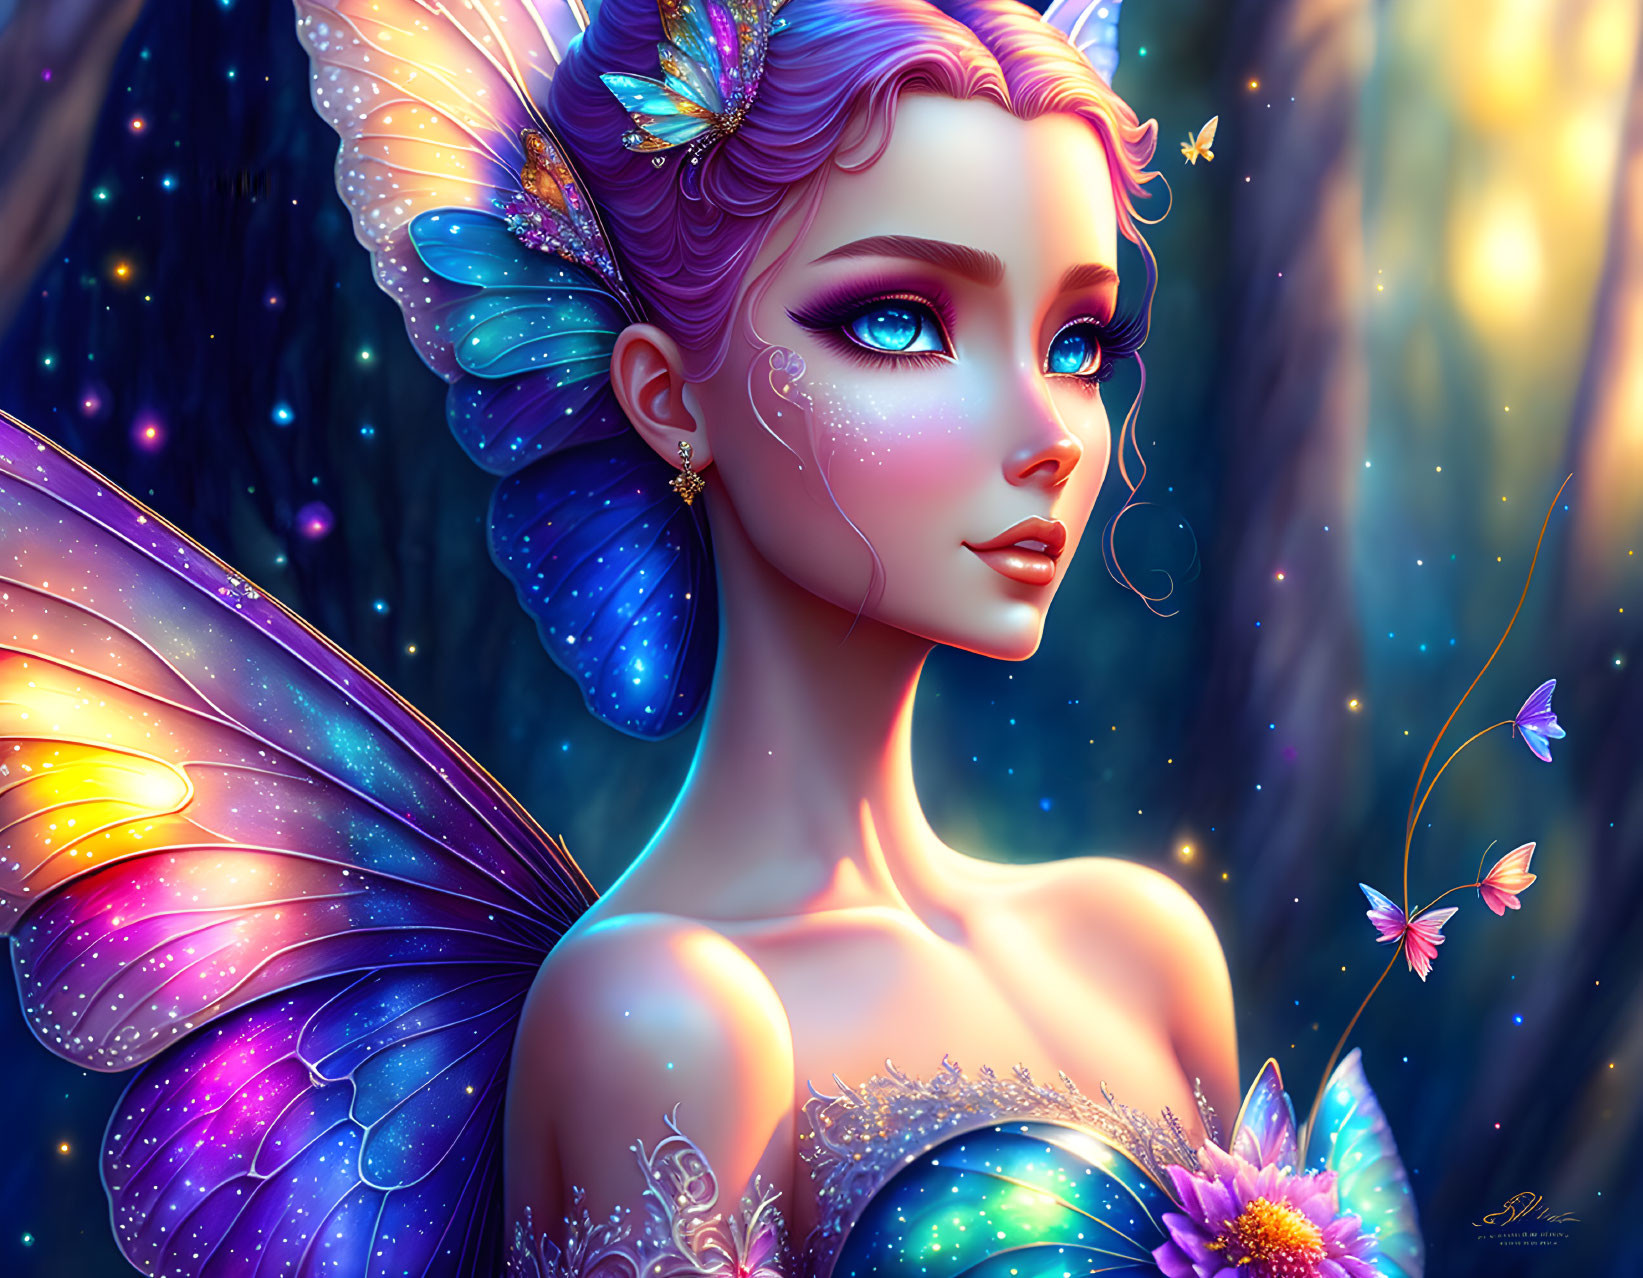 Colorful fairy with butterfly wings in magical forest scene